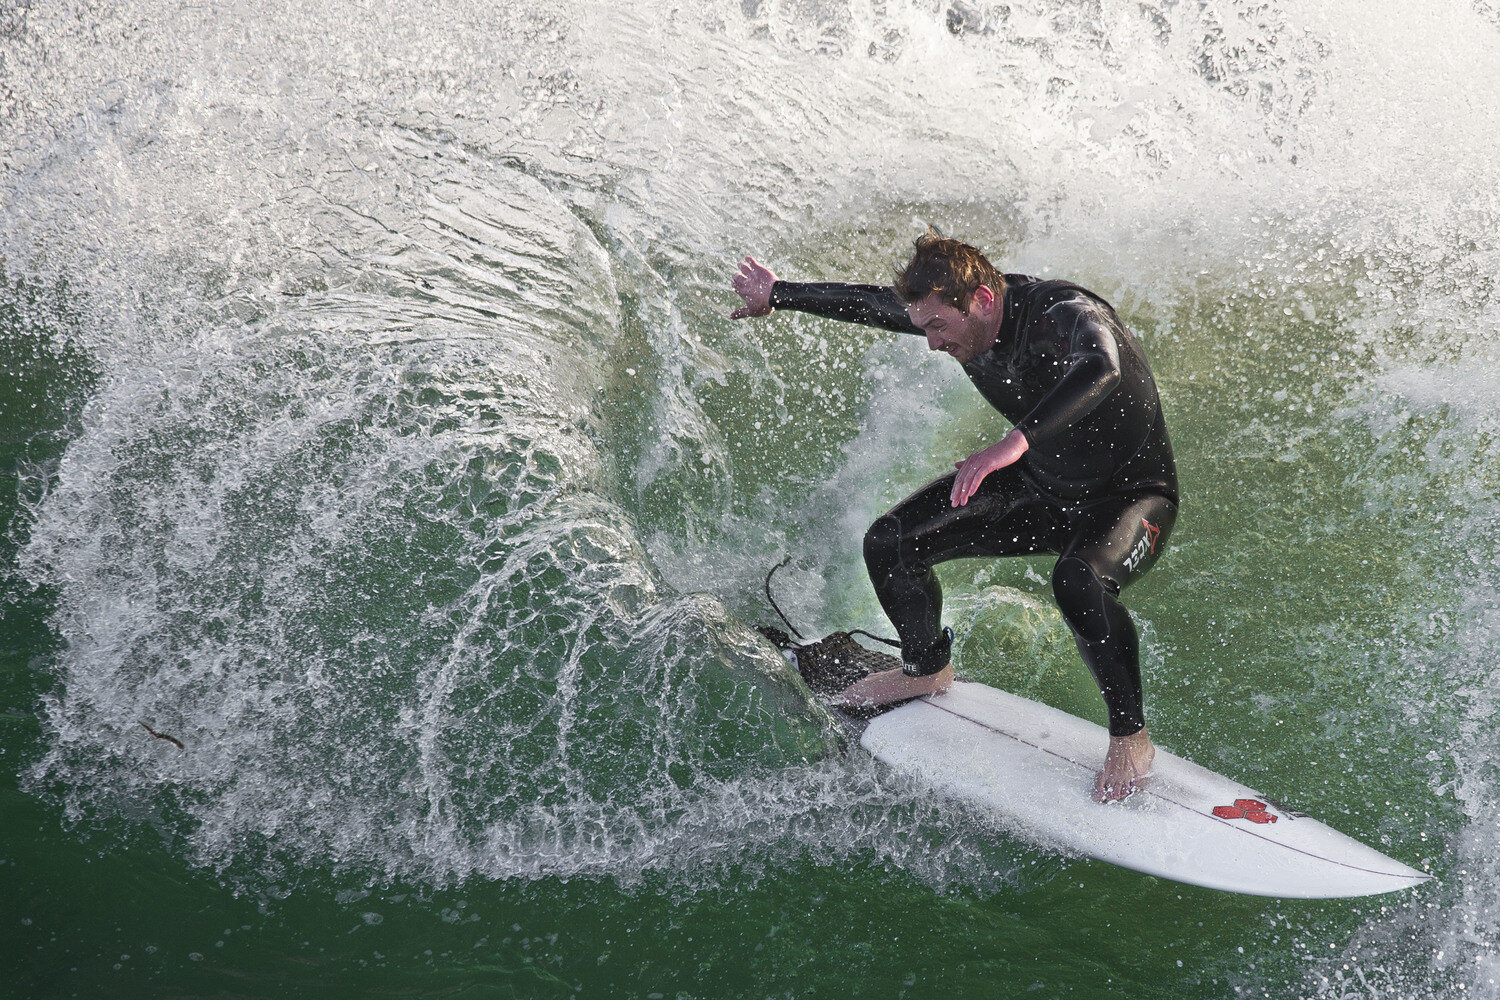  A surfer catches a wave at Steamer Lane in Santa Cruz, CA on Saturday, February 22nd 2014.  